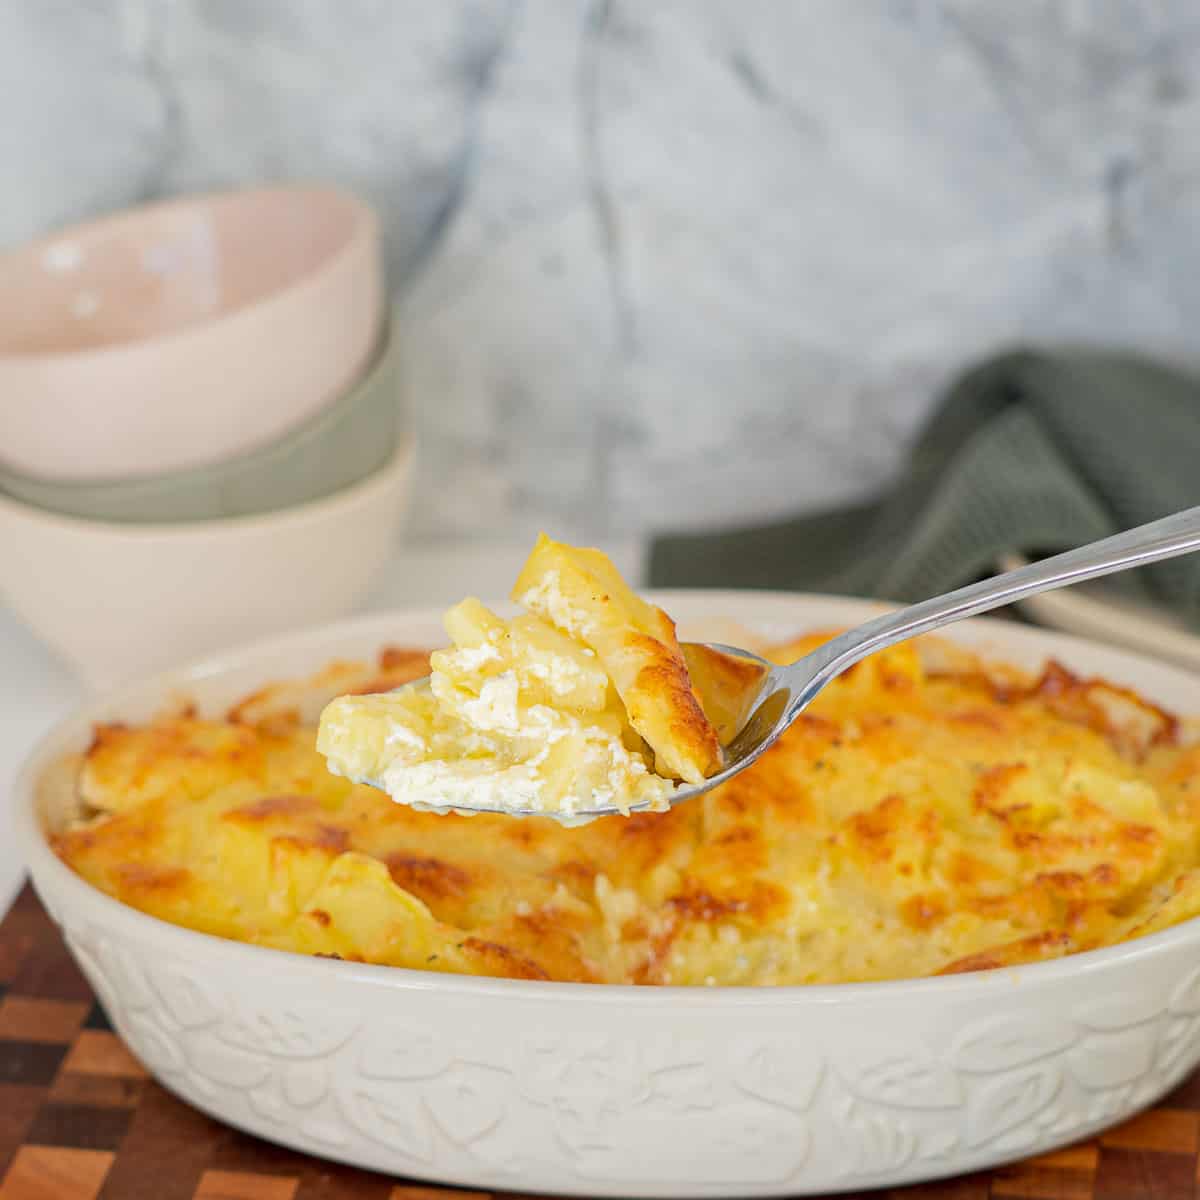 Scalloped potatoes being served with a large spoon.